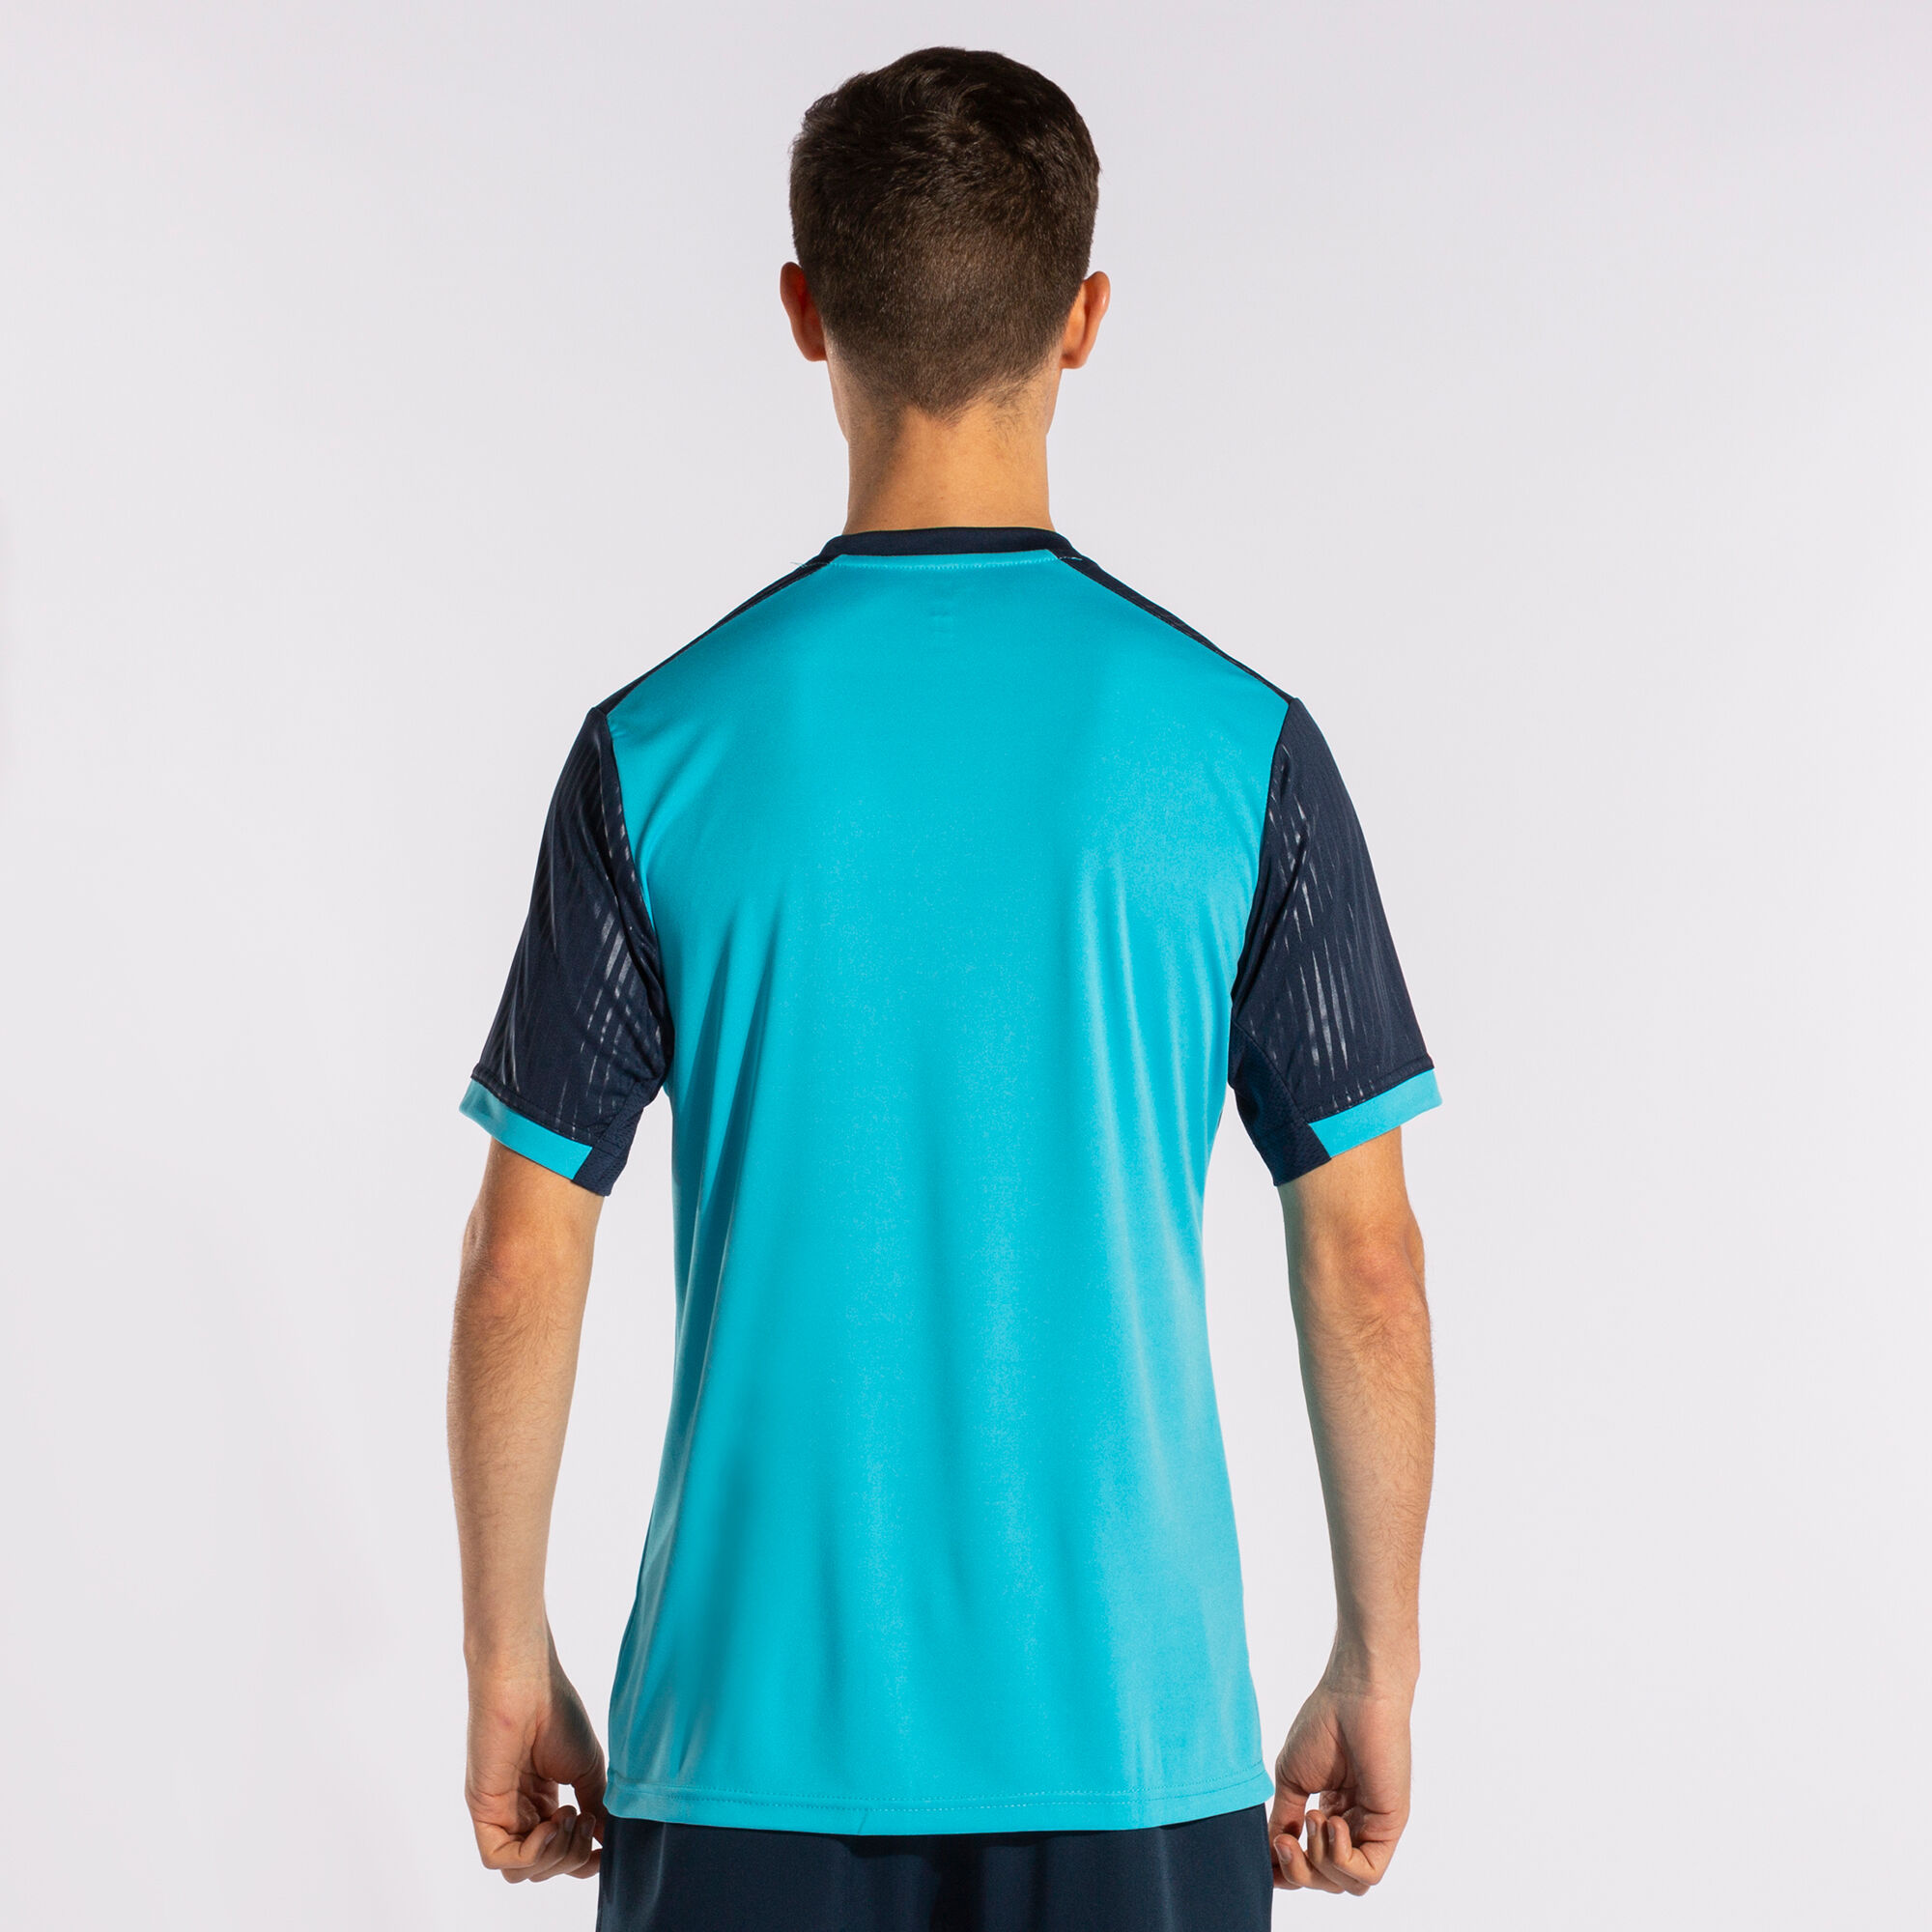 MAILLOT MANCHES COURTES HOMME MONTREAL TURQUOISE FLUO BLEU MARINE